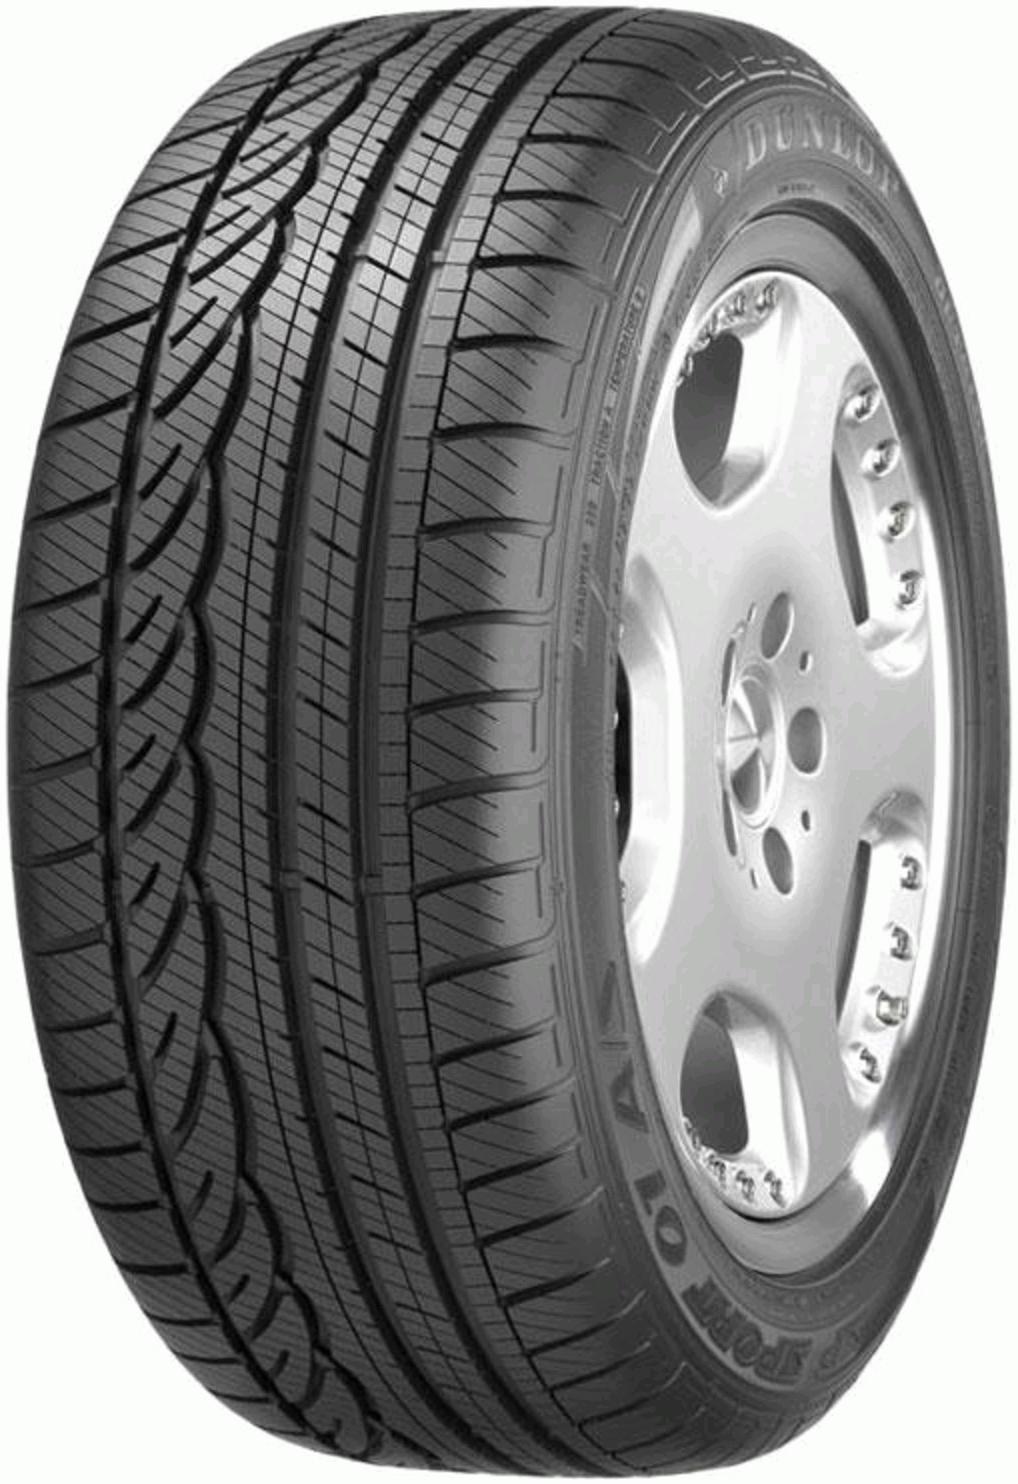 - Reviews AS and Dunlop 01 Sport Tyre SP Tests